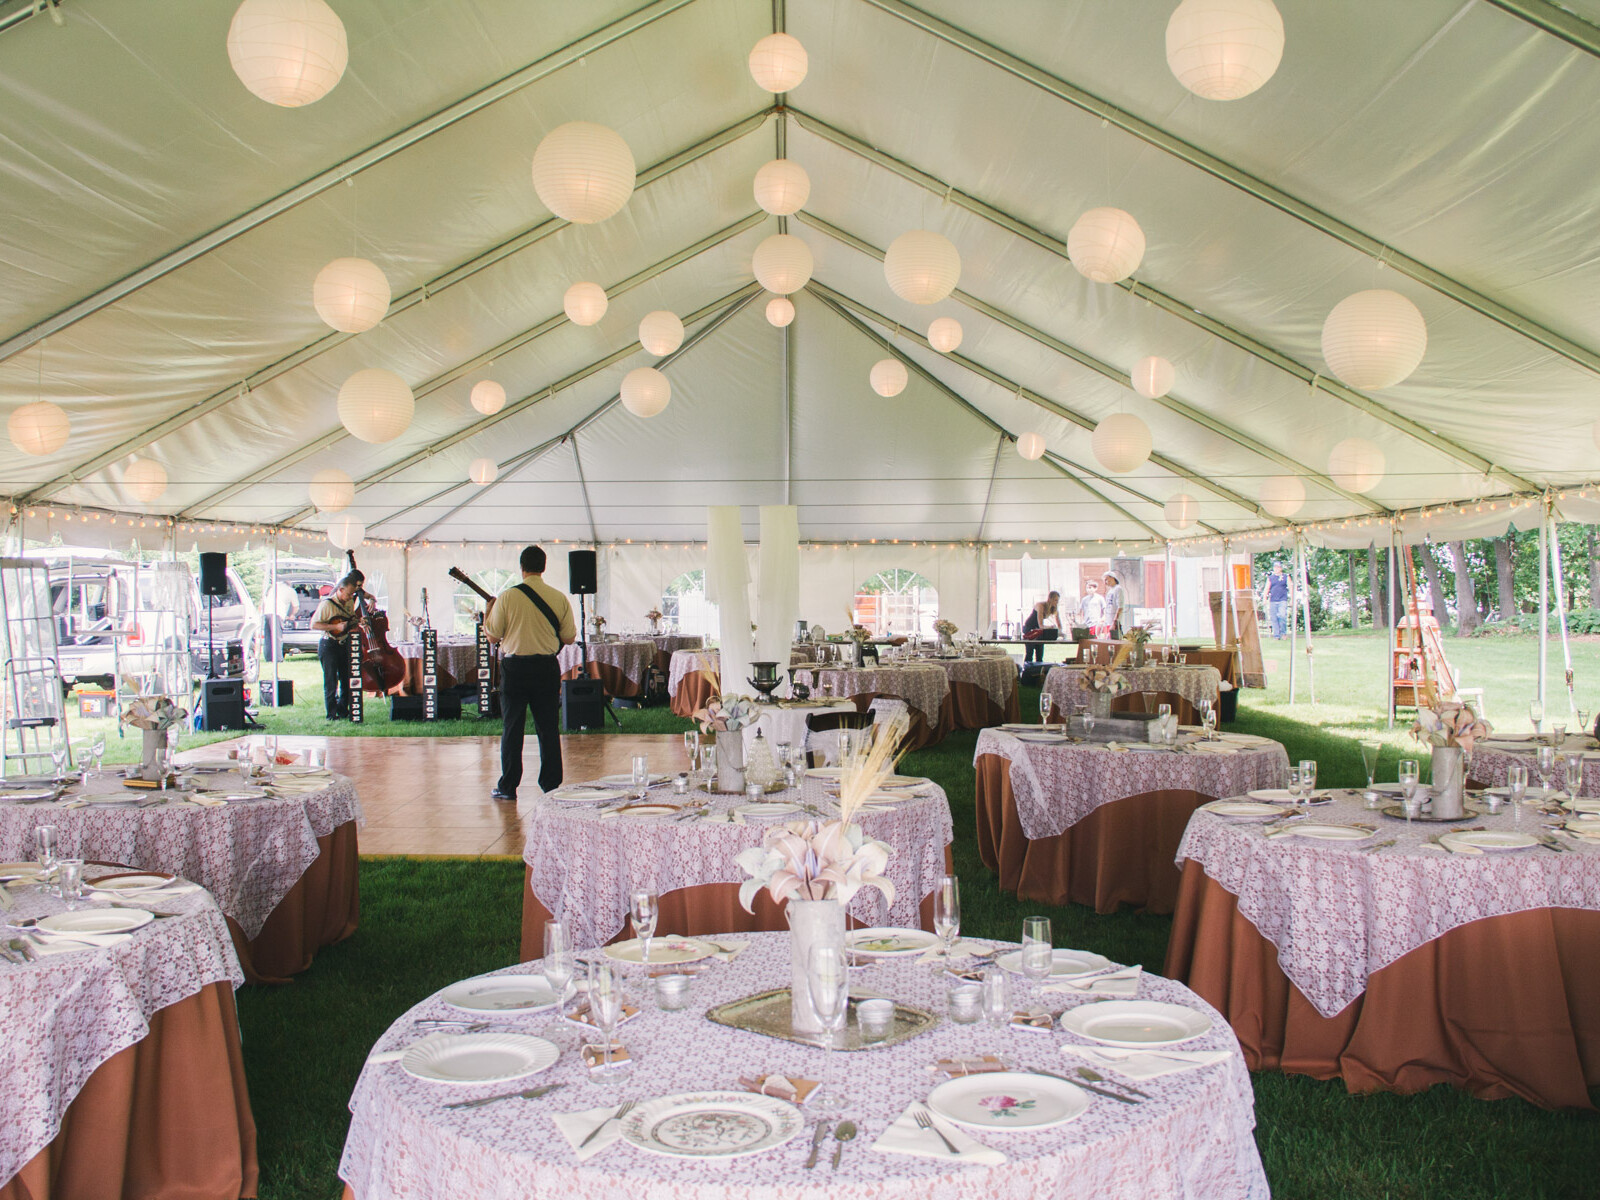 Inside a large frame wedding tent with globe lights, elegant tables and a dance floor.